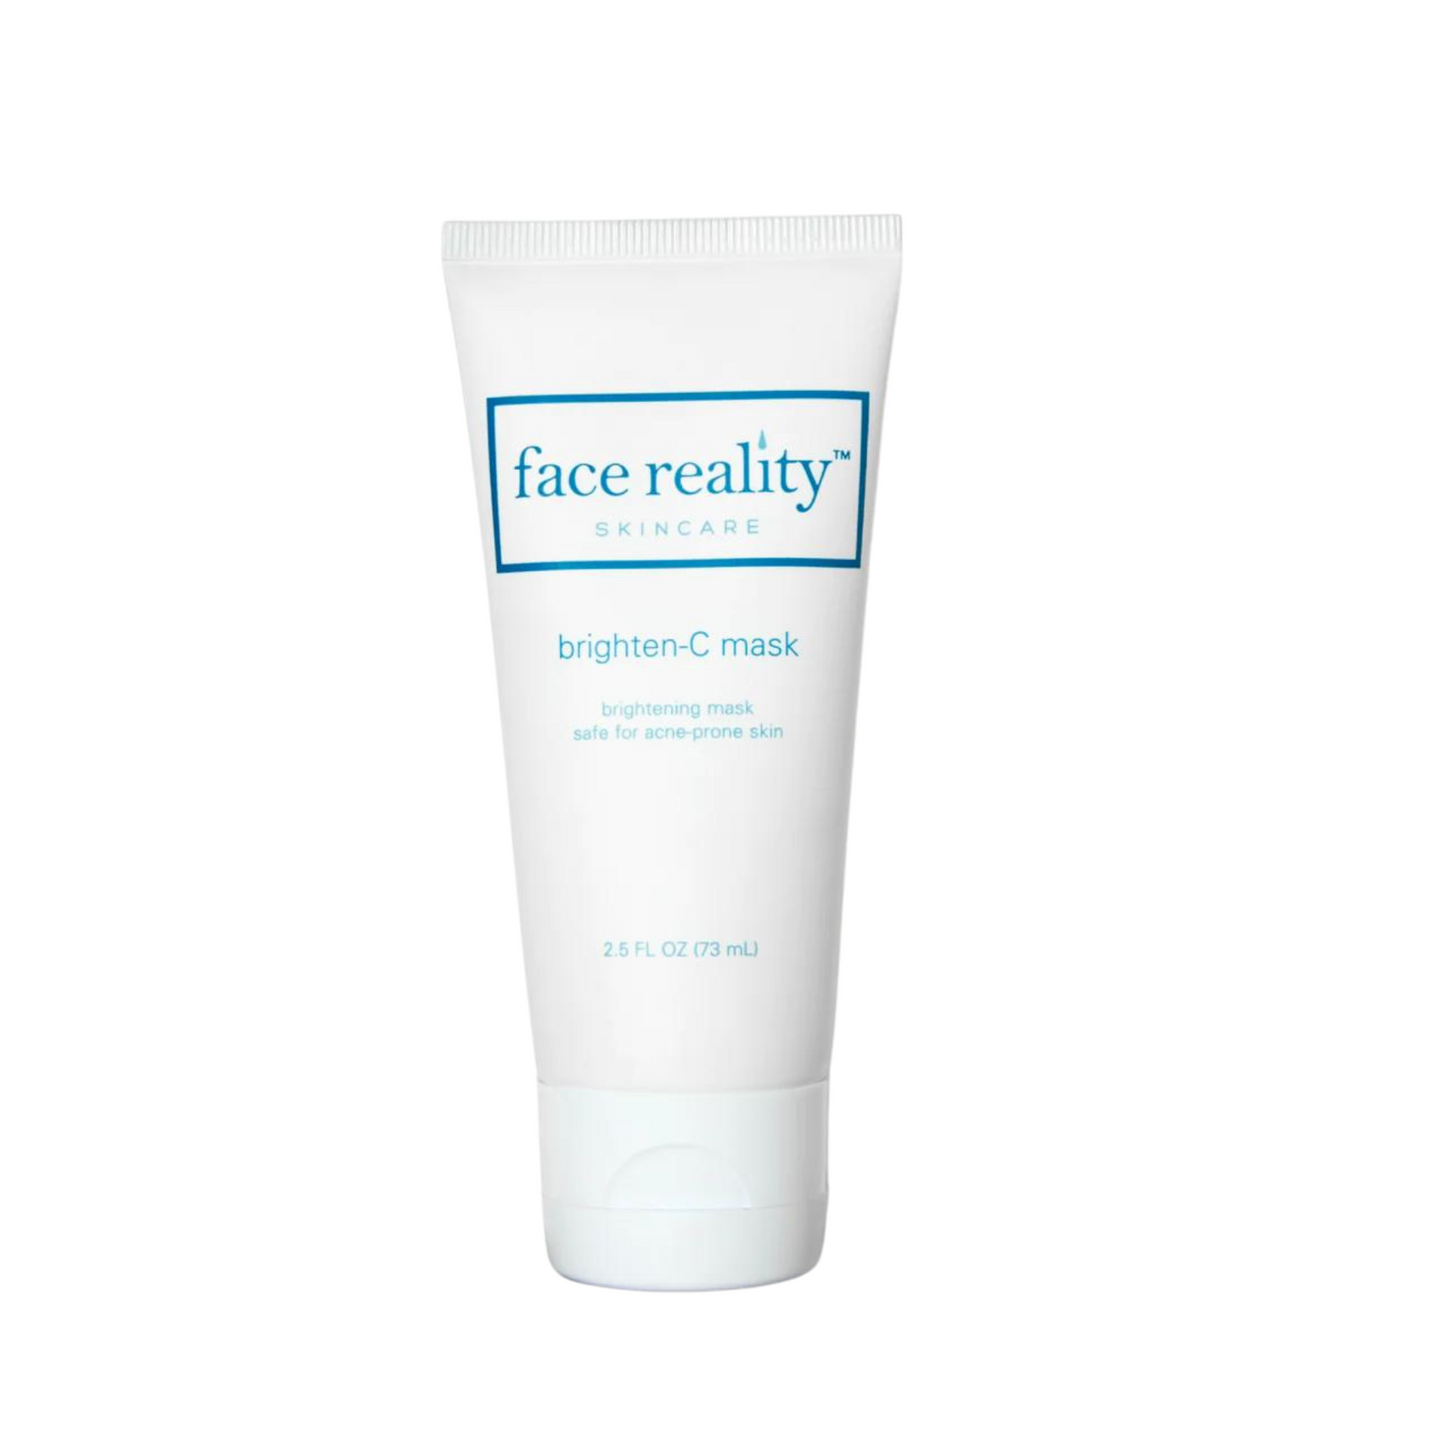 Brighten-C Mask | Face Reality Skincare